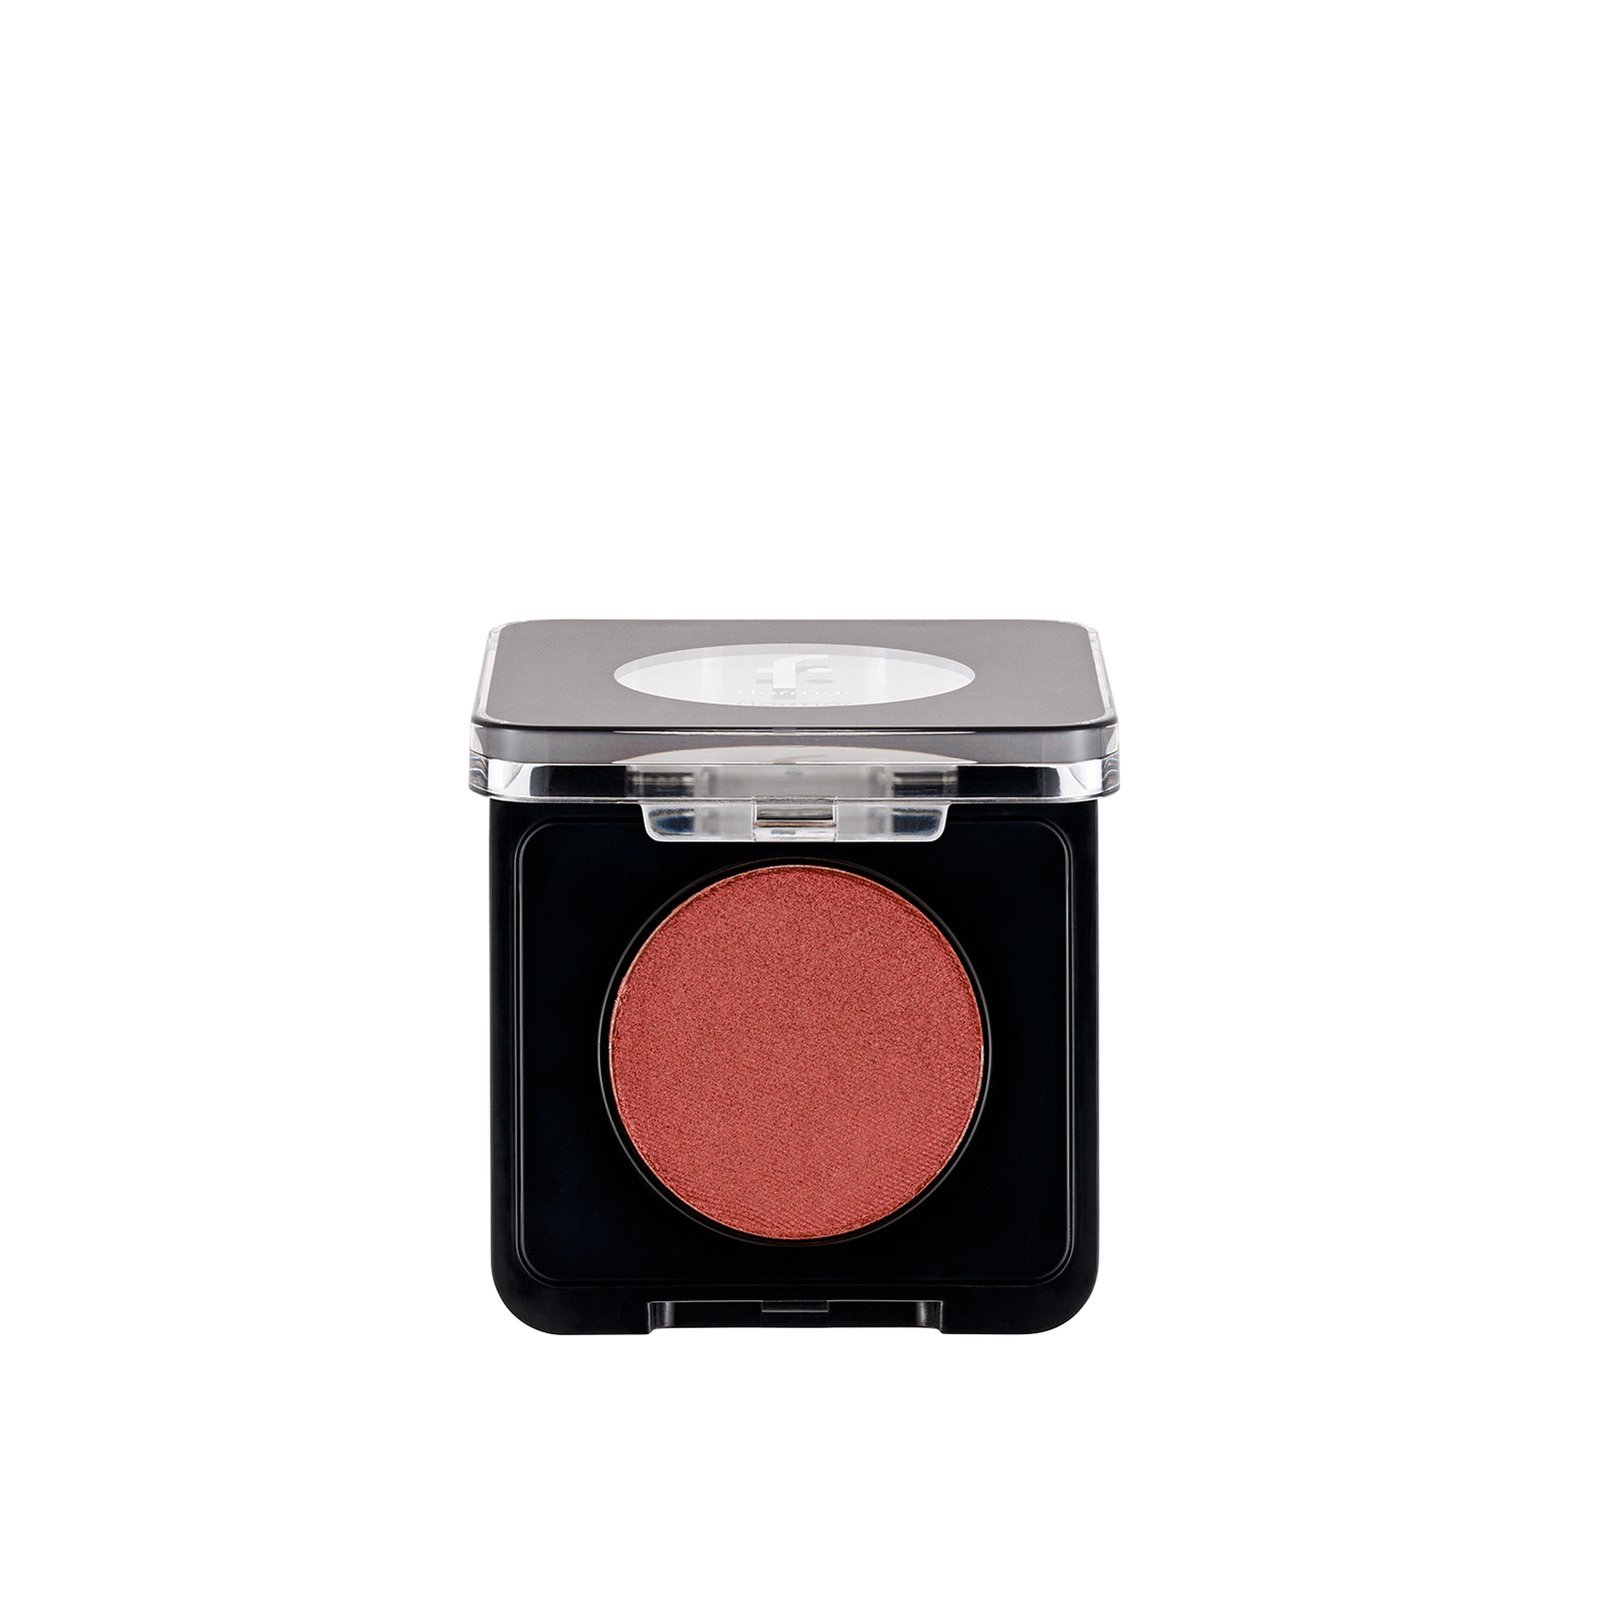 Flormar Mono Eyeshadow 022 It's All About Shine 1.5g